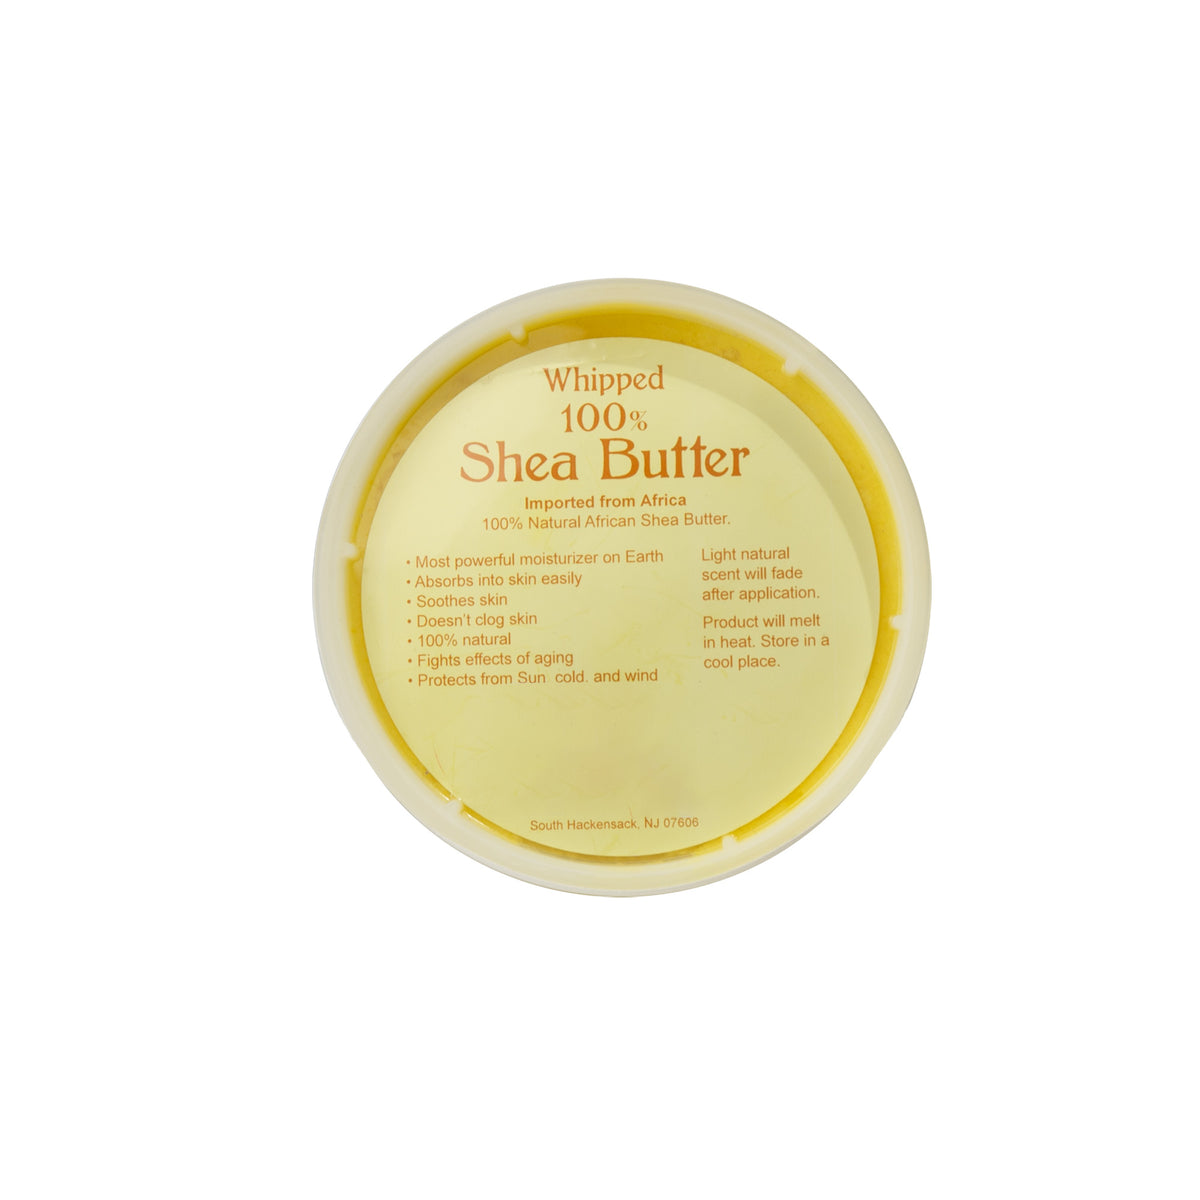 Primary image of Whipped Shea Butter